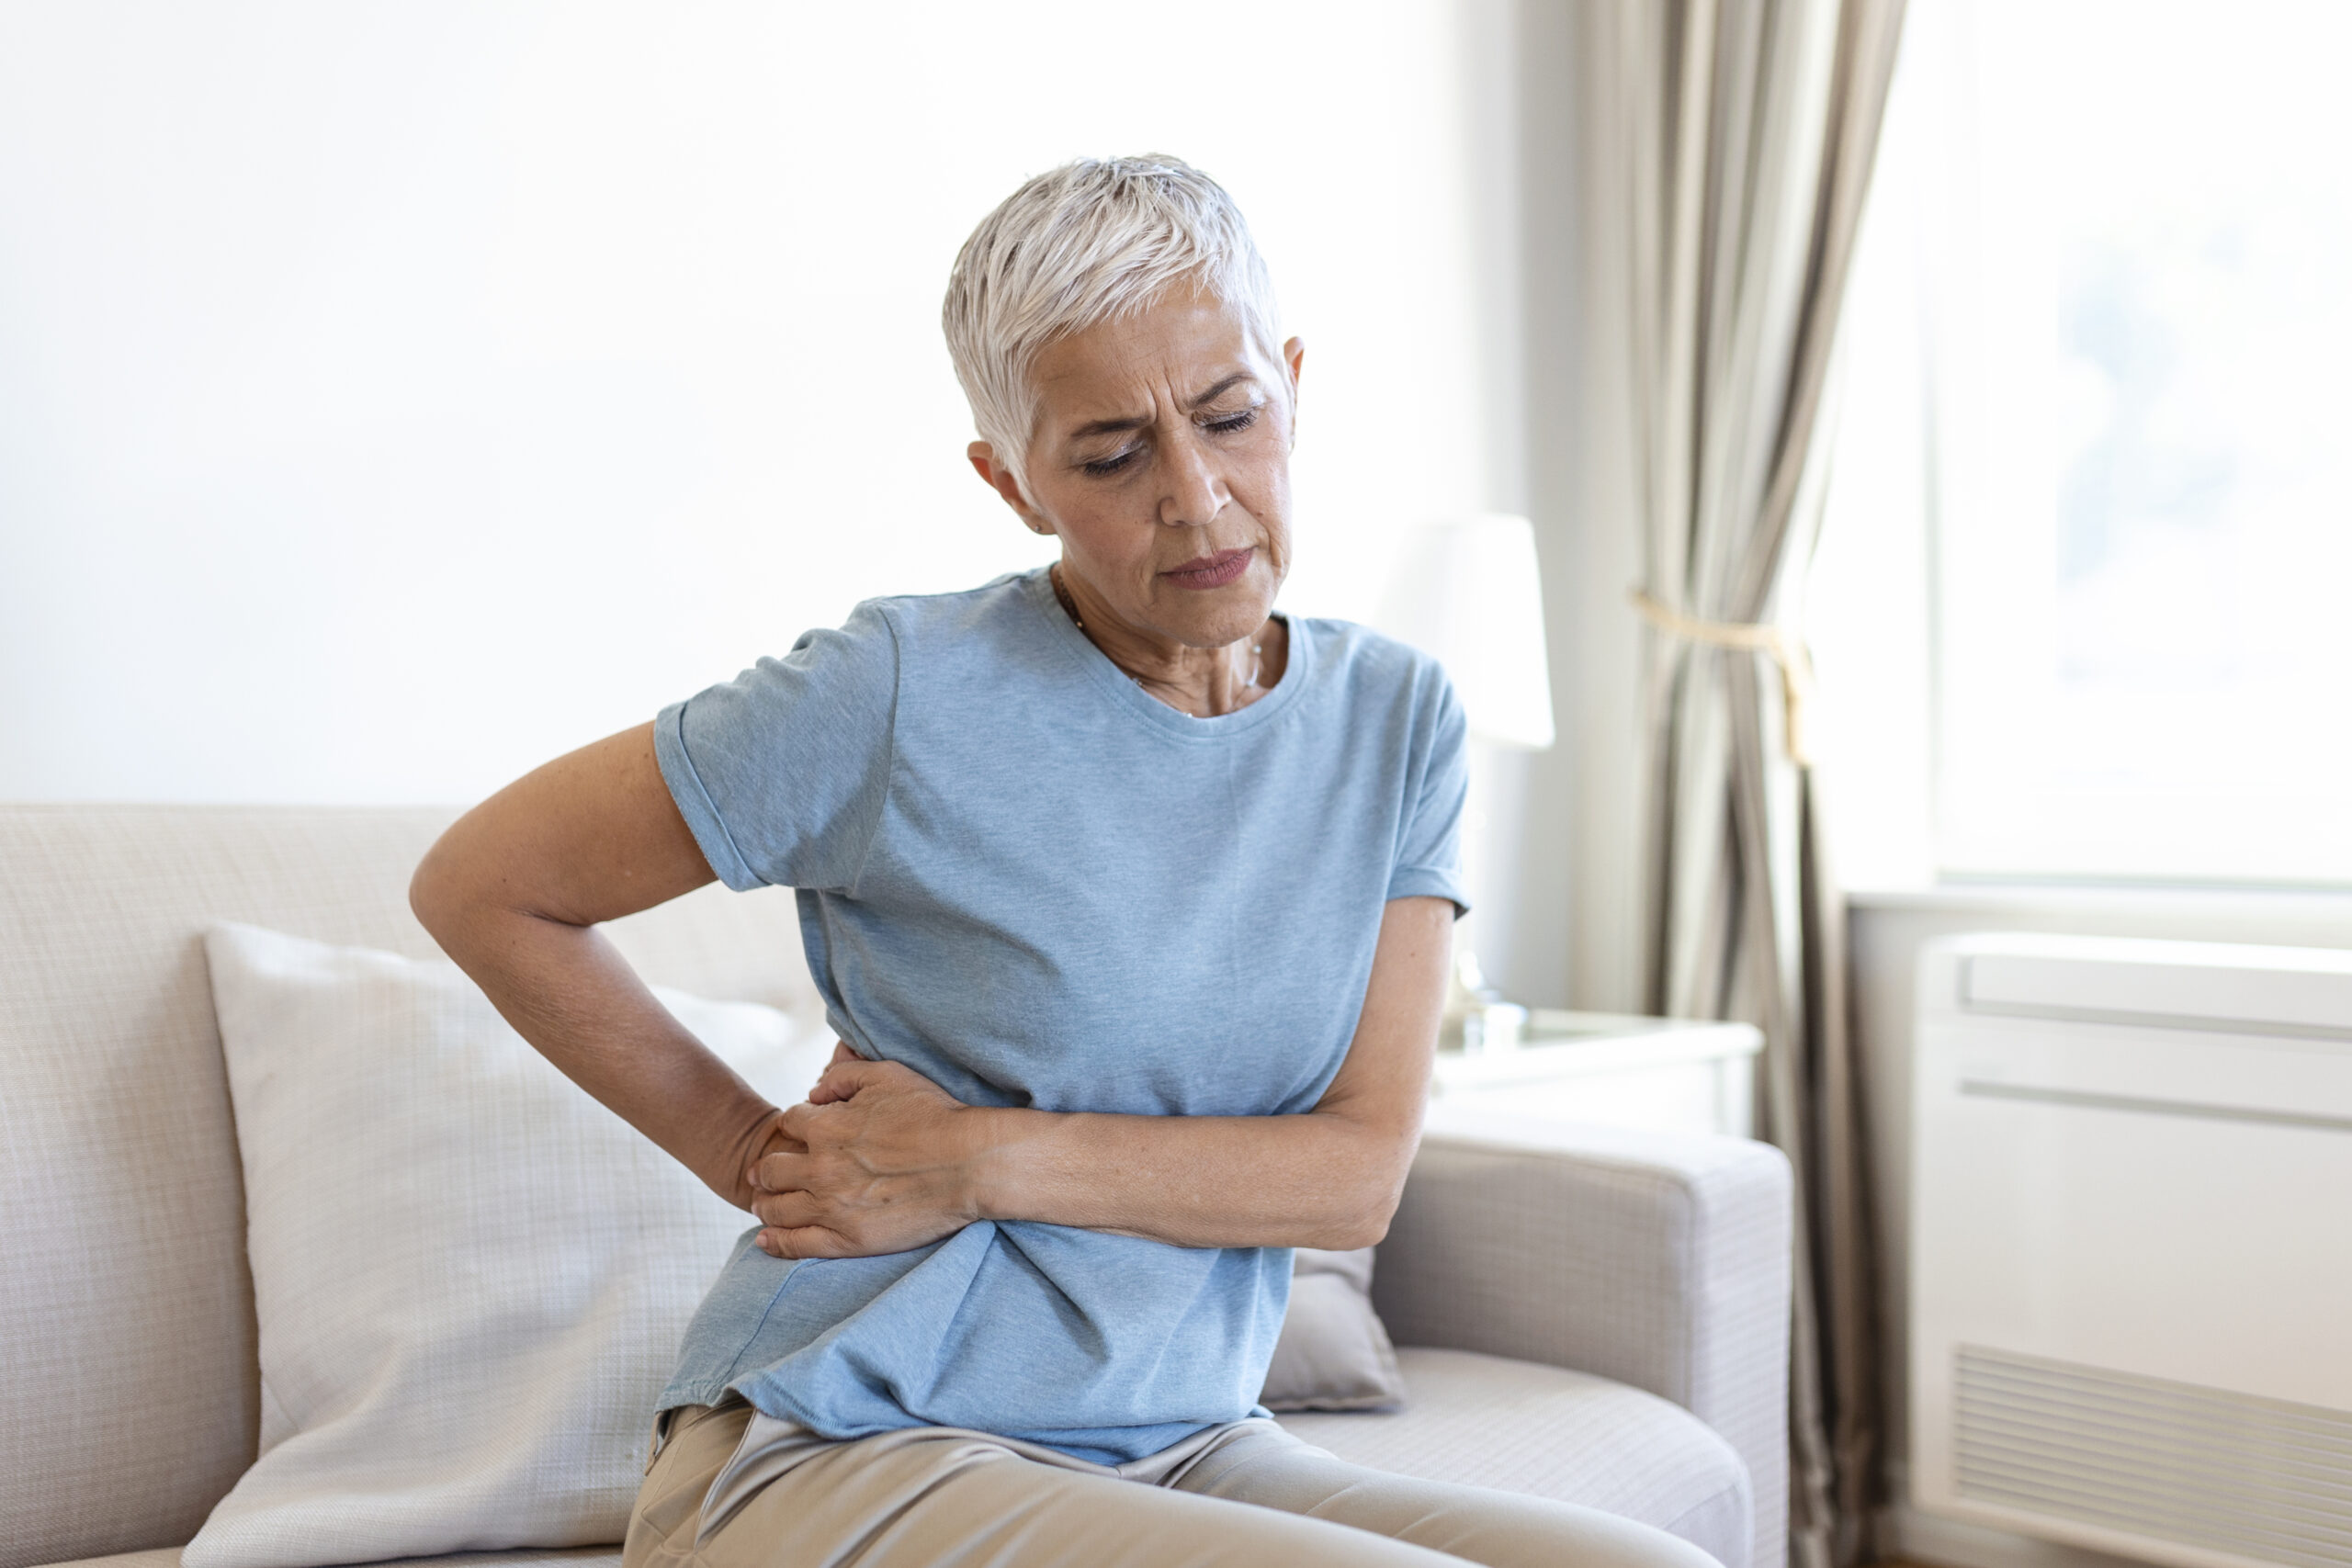 Kidney Infection: What Is, Symptoms, Treatment, and More